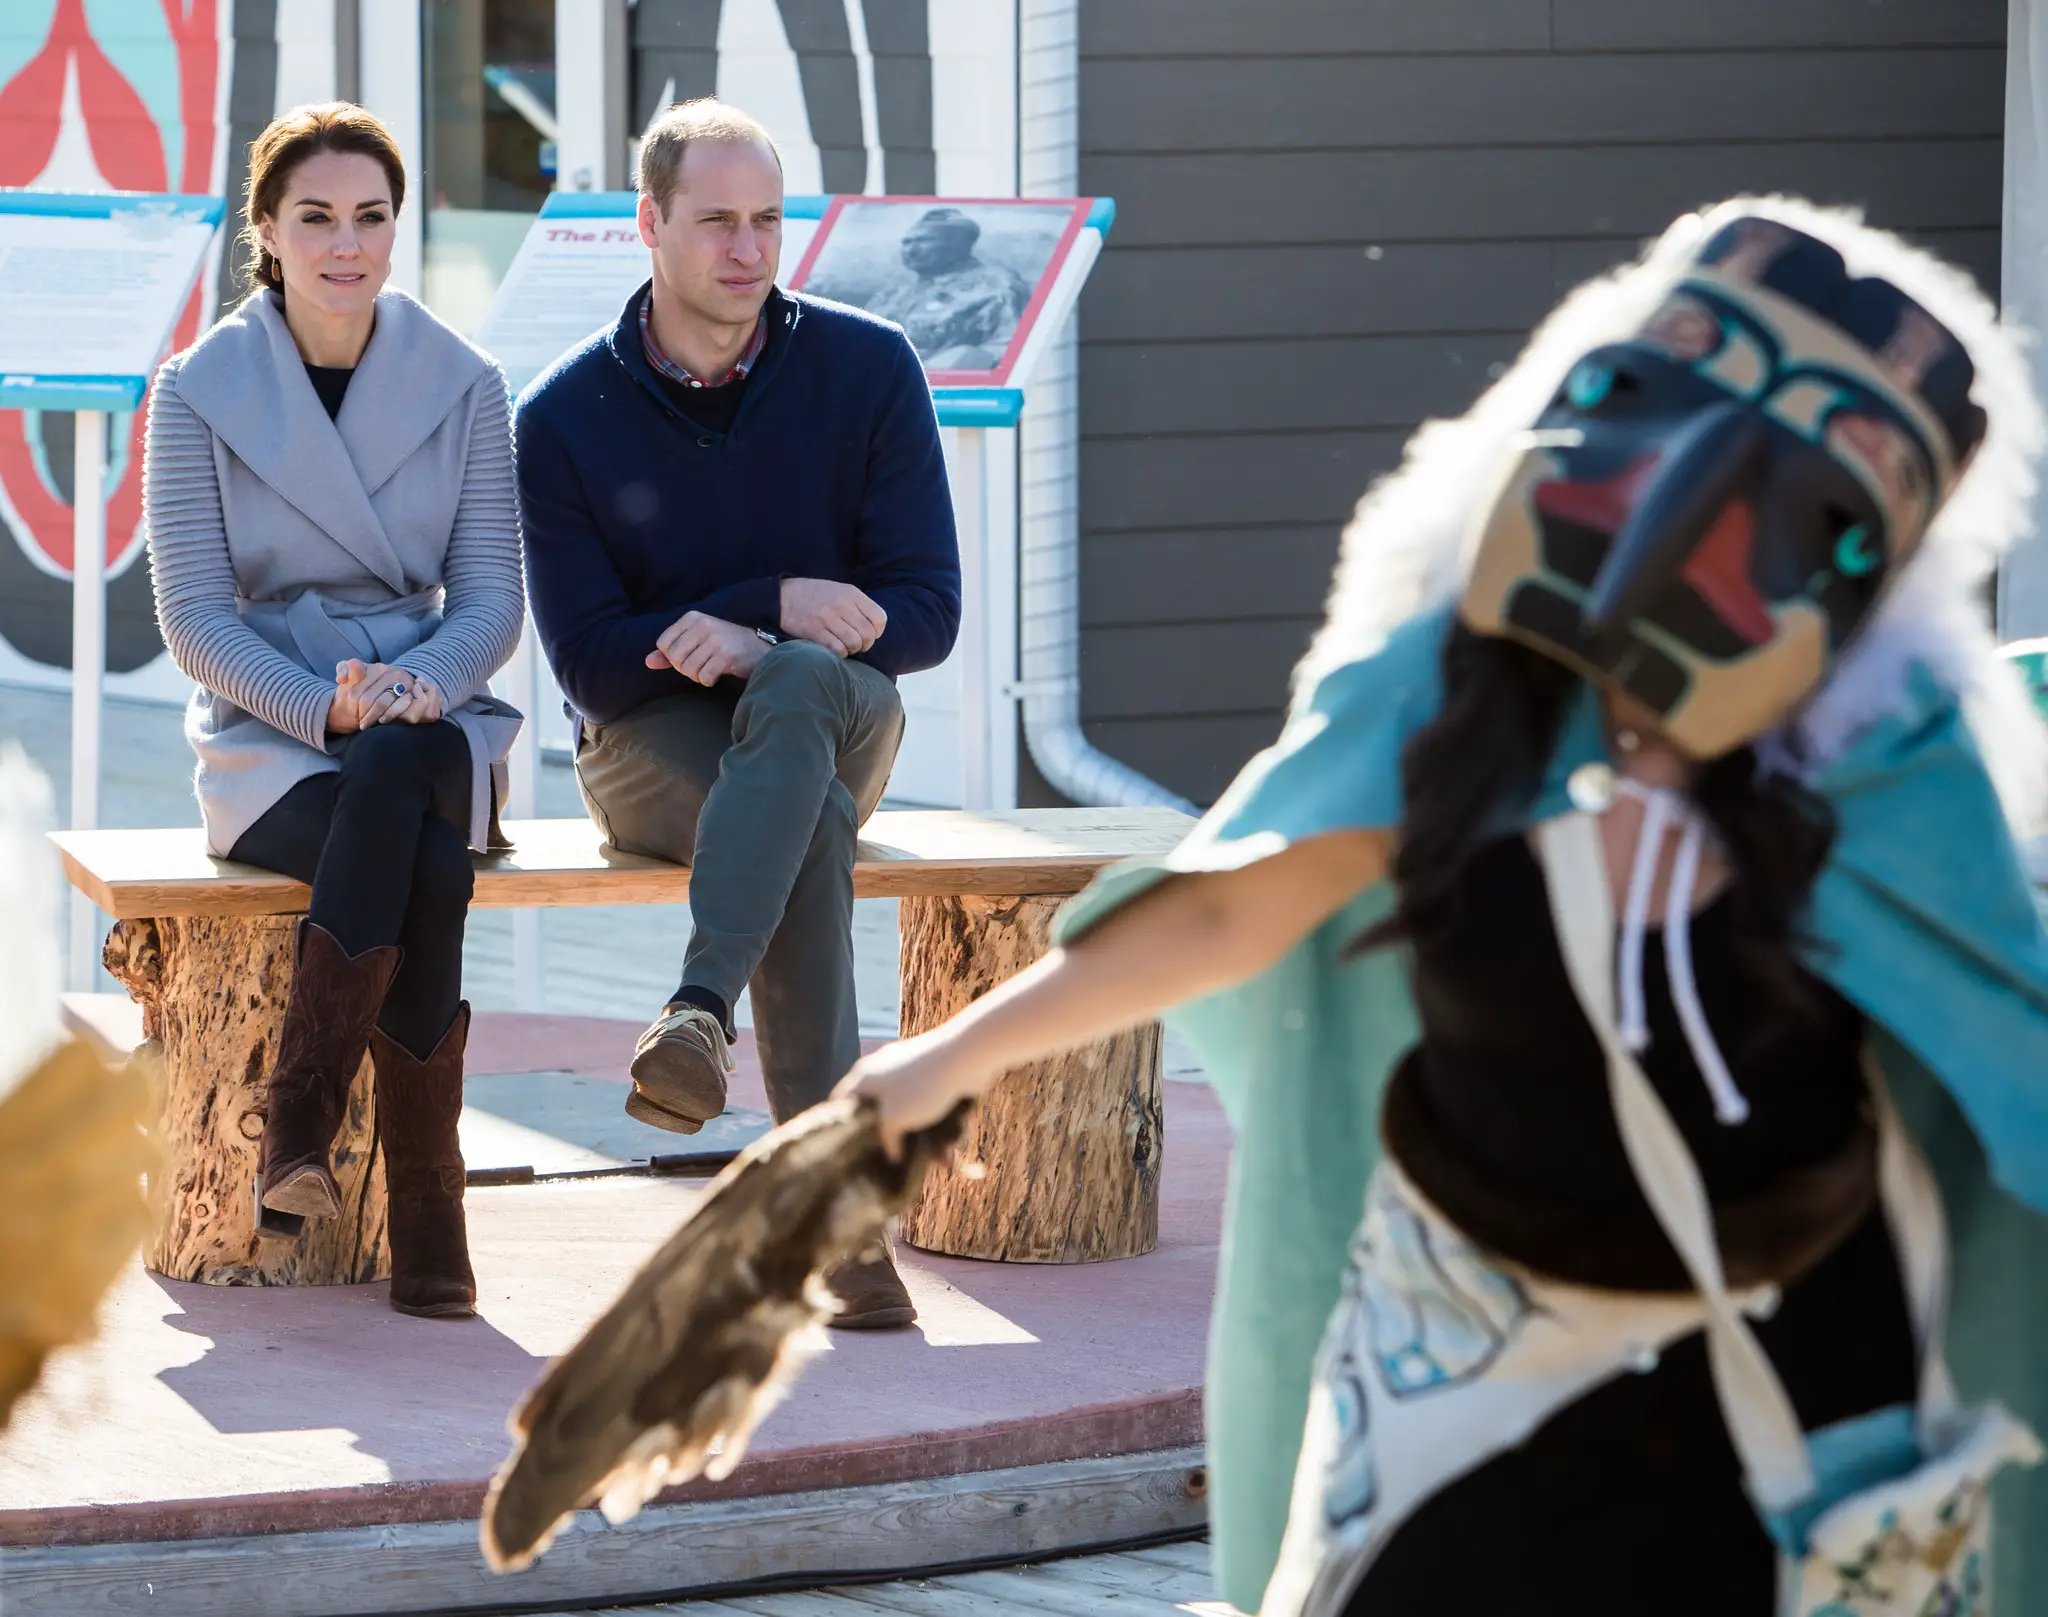 The Duke and Duchess of cambridge watched dance performance at totem pole